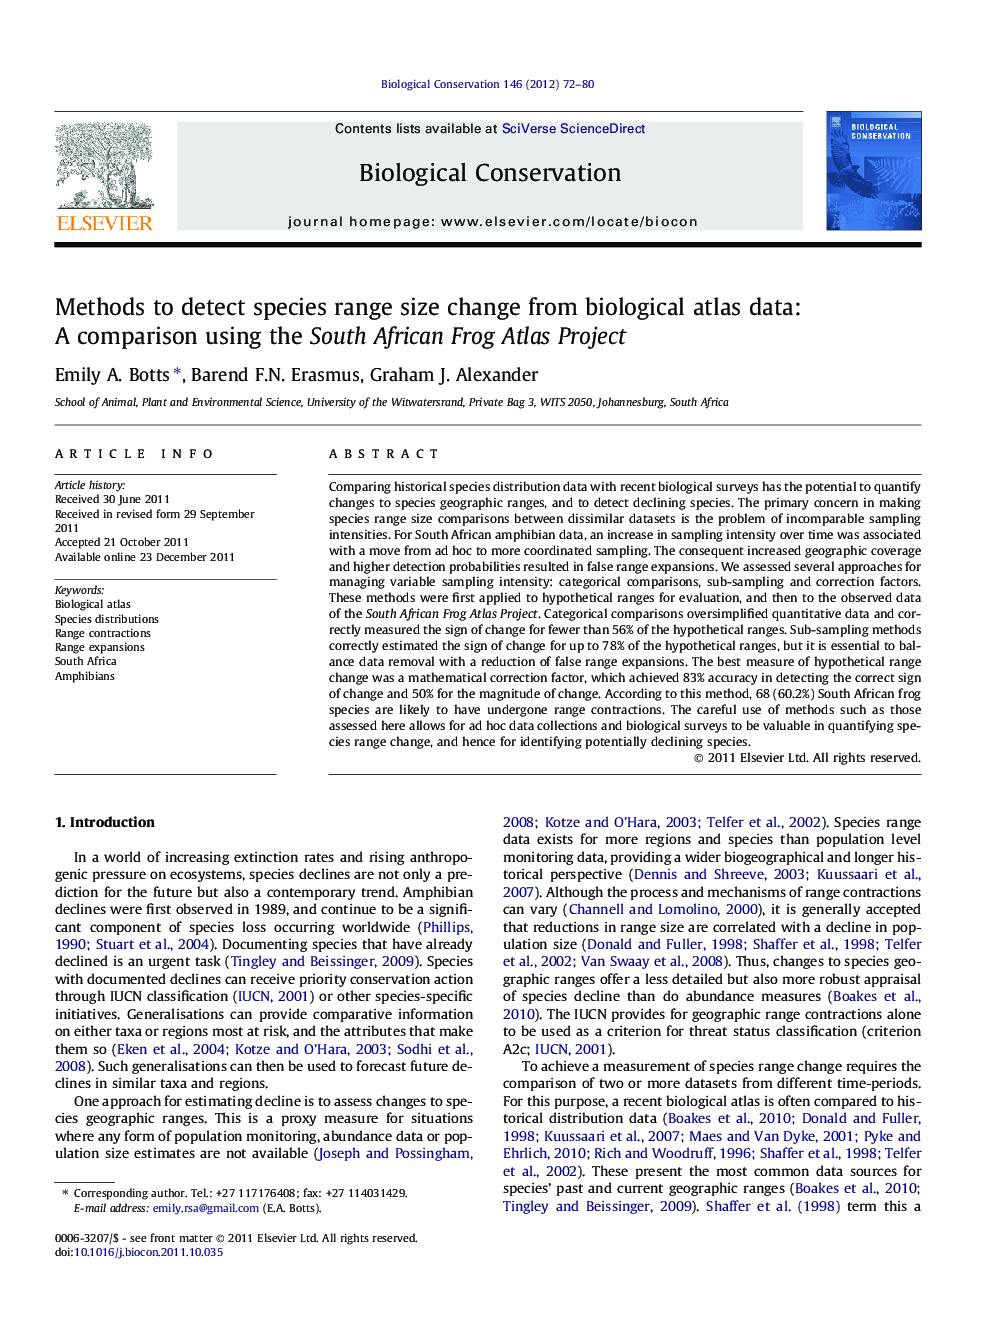 Methods to detect species range size change from biological atlas data: A comparison using the South African Frog Atlas Project